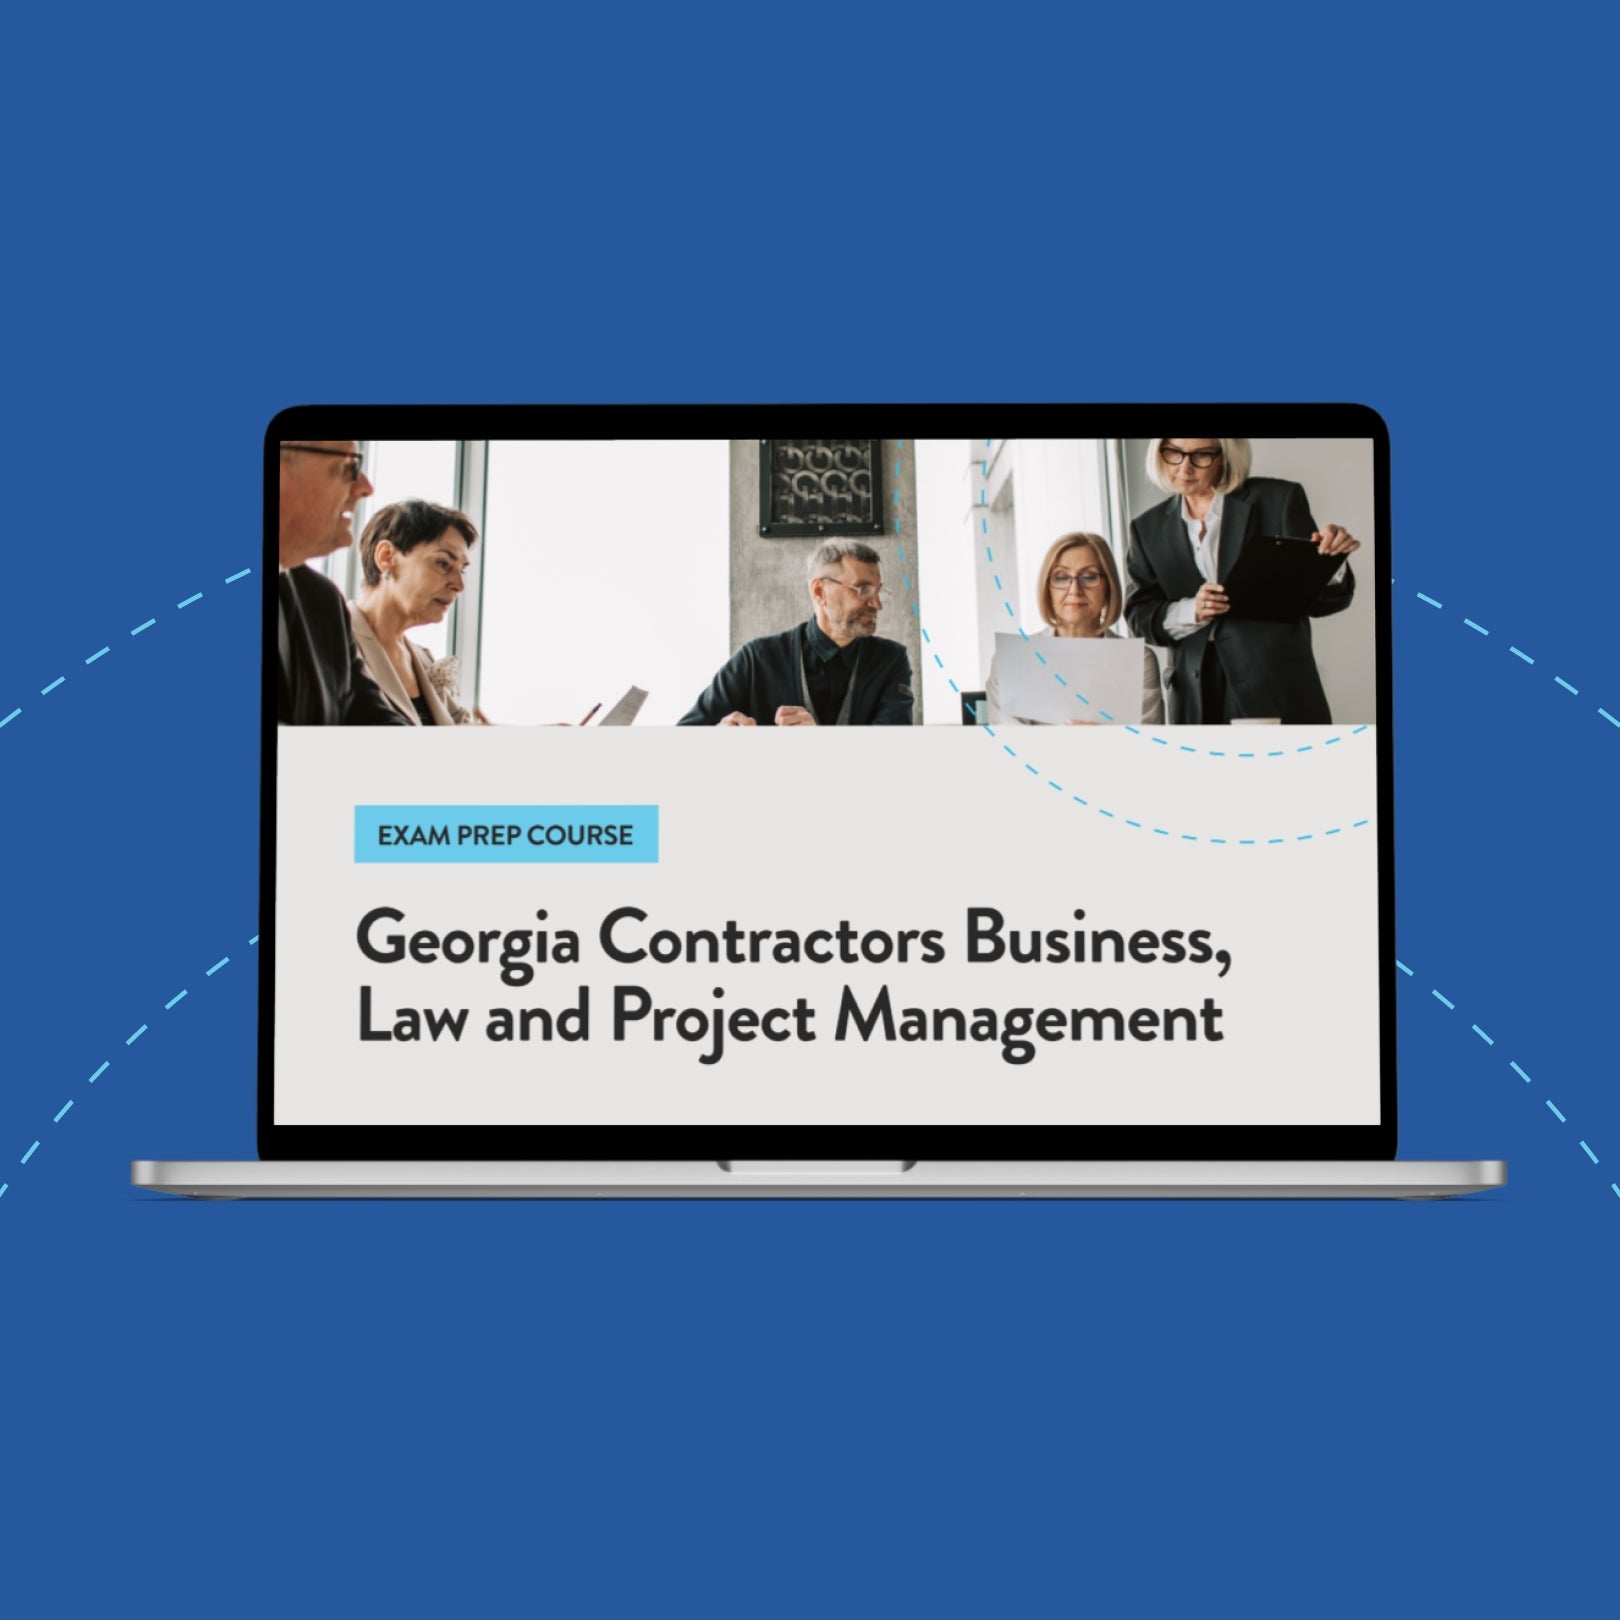 Georgia Contractors Business, Law and Project Management Exam Prep Course